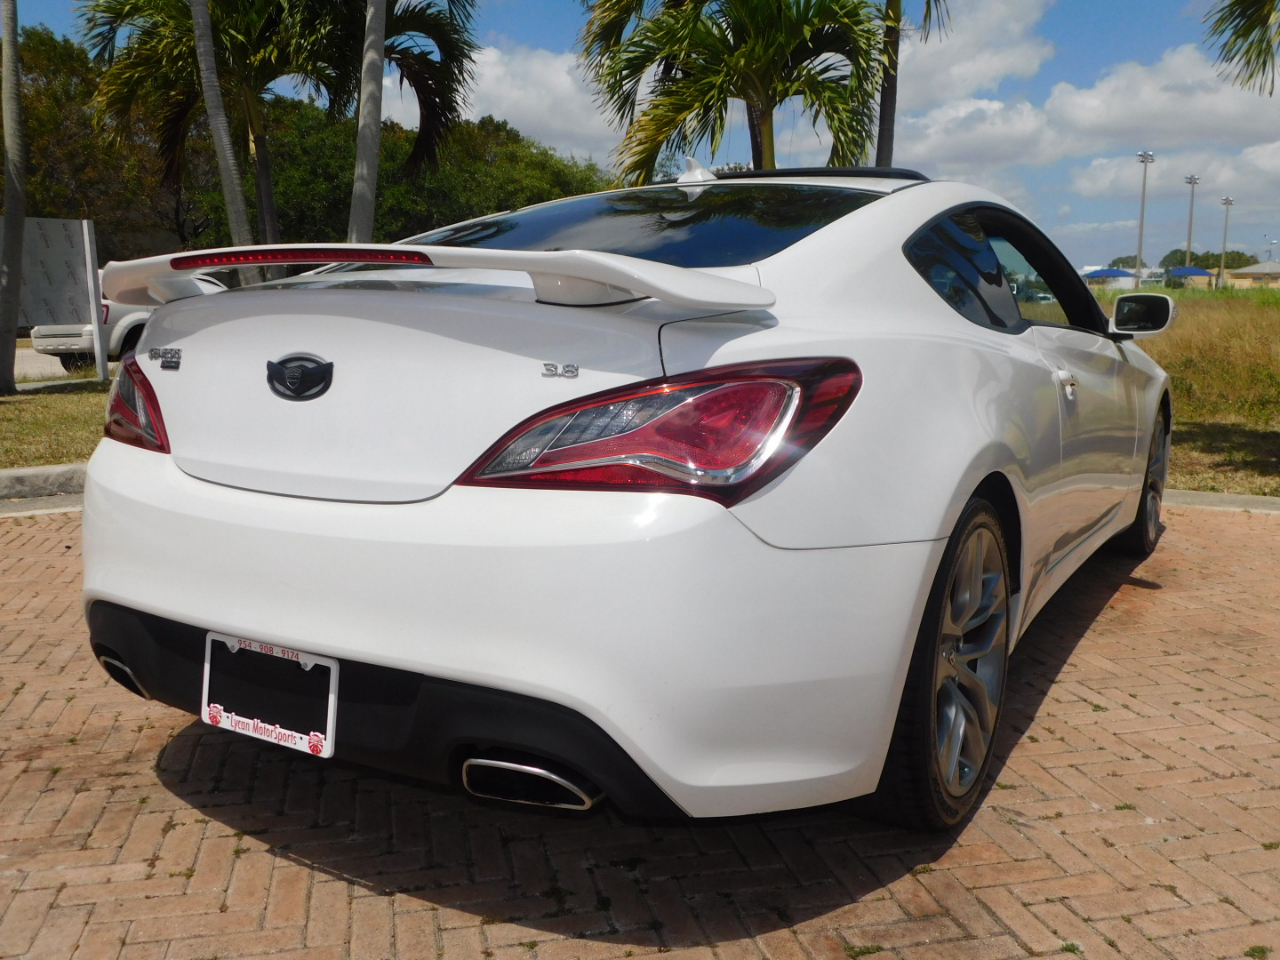 Used 2013 Hyundai Genesis Coupe 3.8 Track Manual for Sale in Miami FL ...